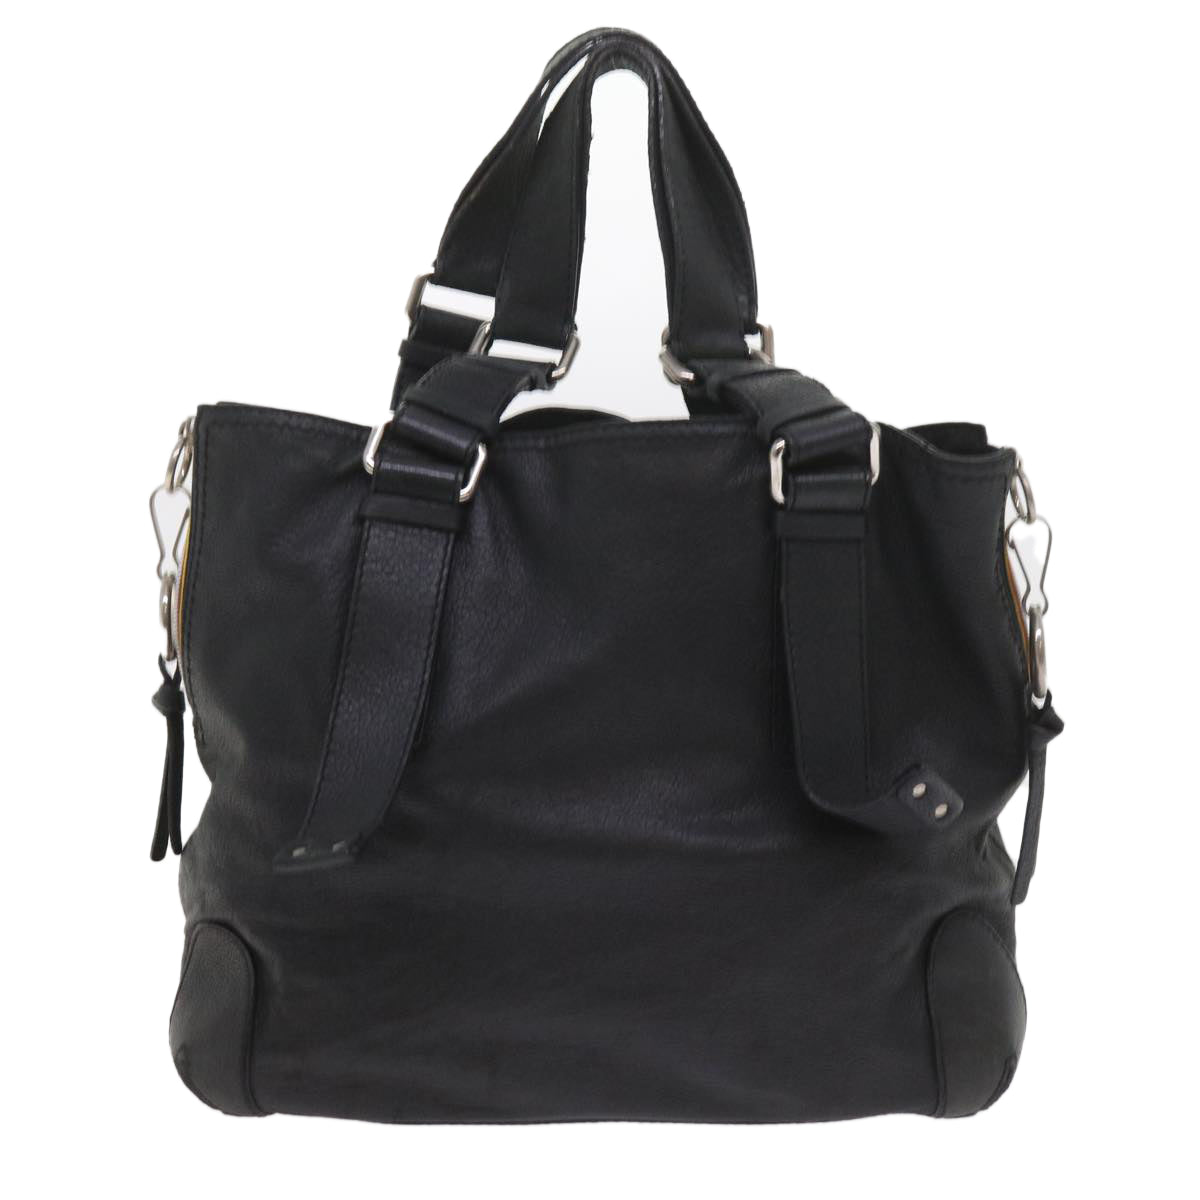 Chloe Tote Bag Leather Black Auth bs9712 - 0